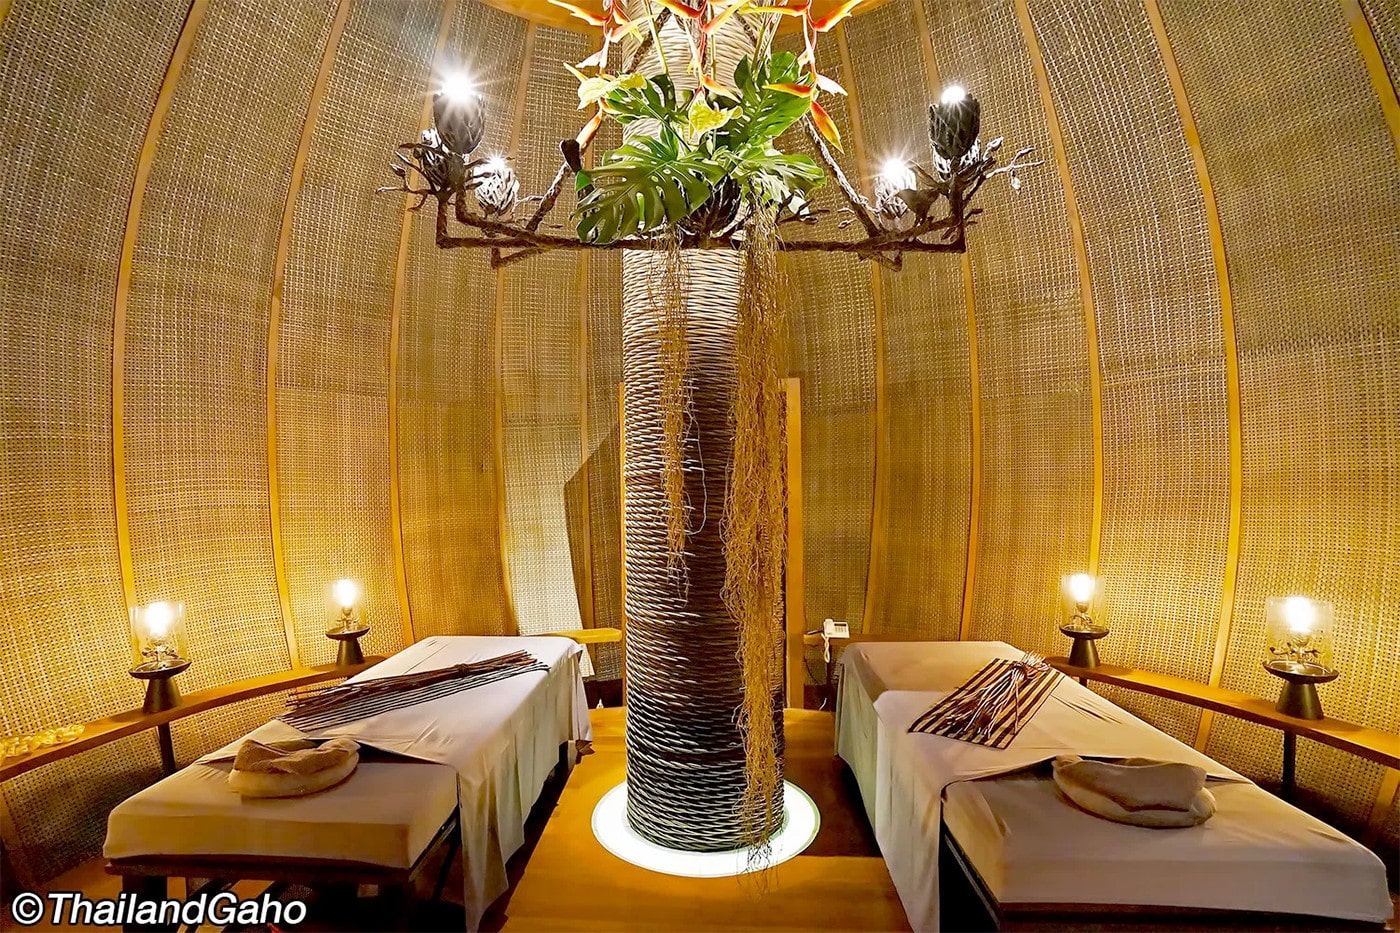 The Coqoon Spa in Phuket